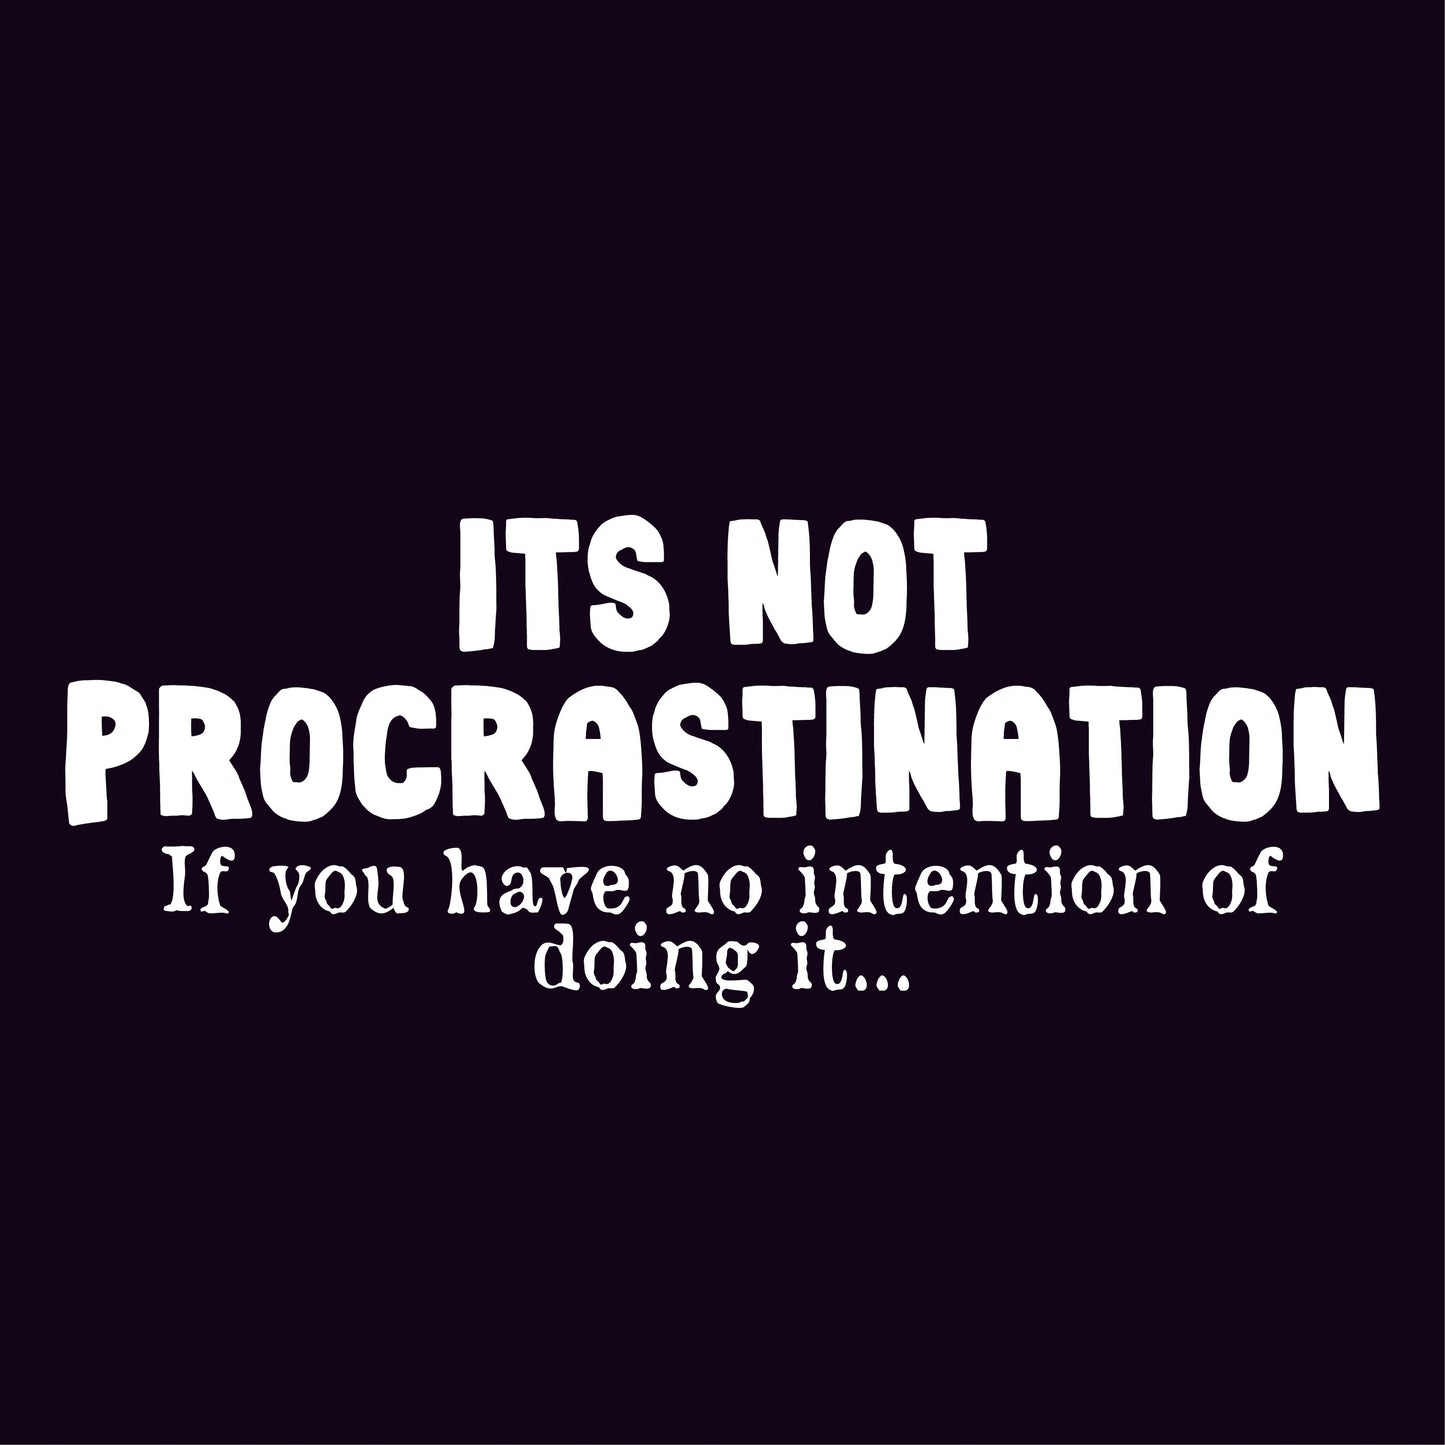 Its not Procrastination, if you have no intention of doing it..